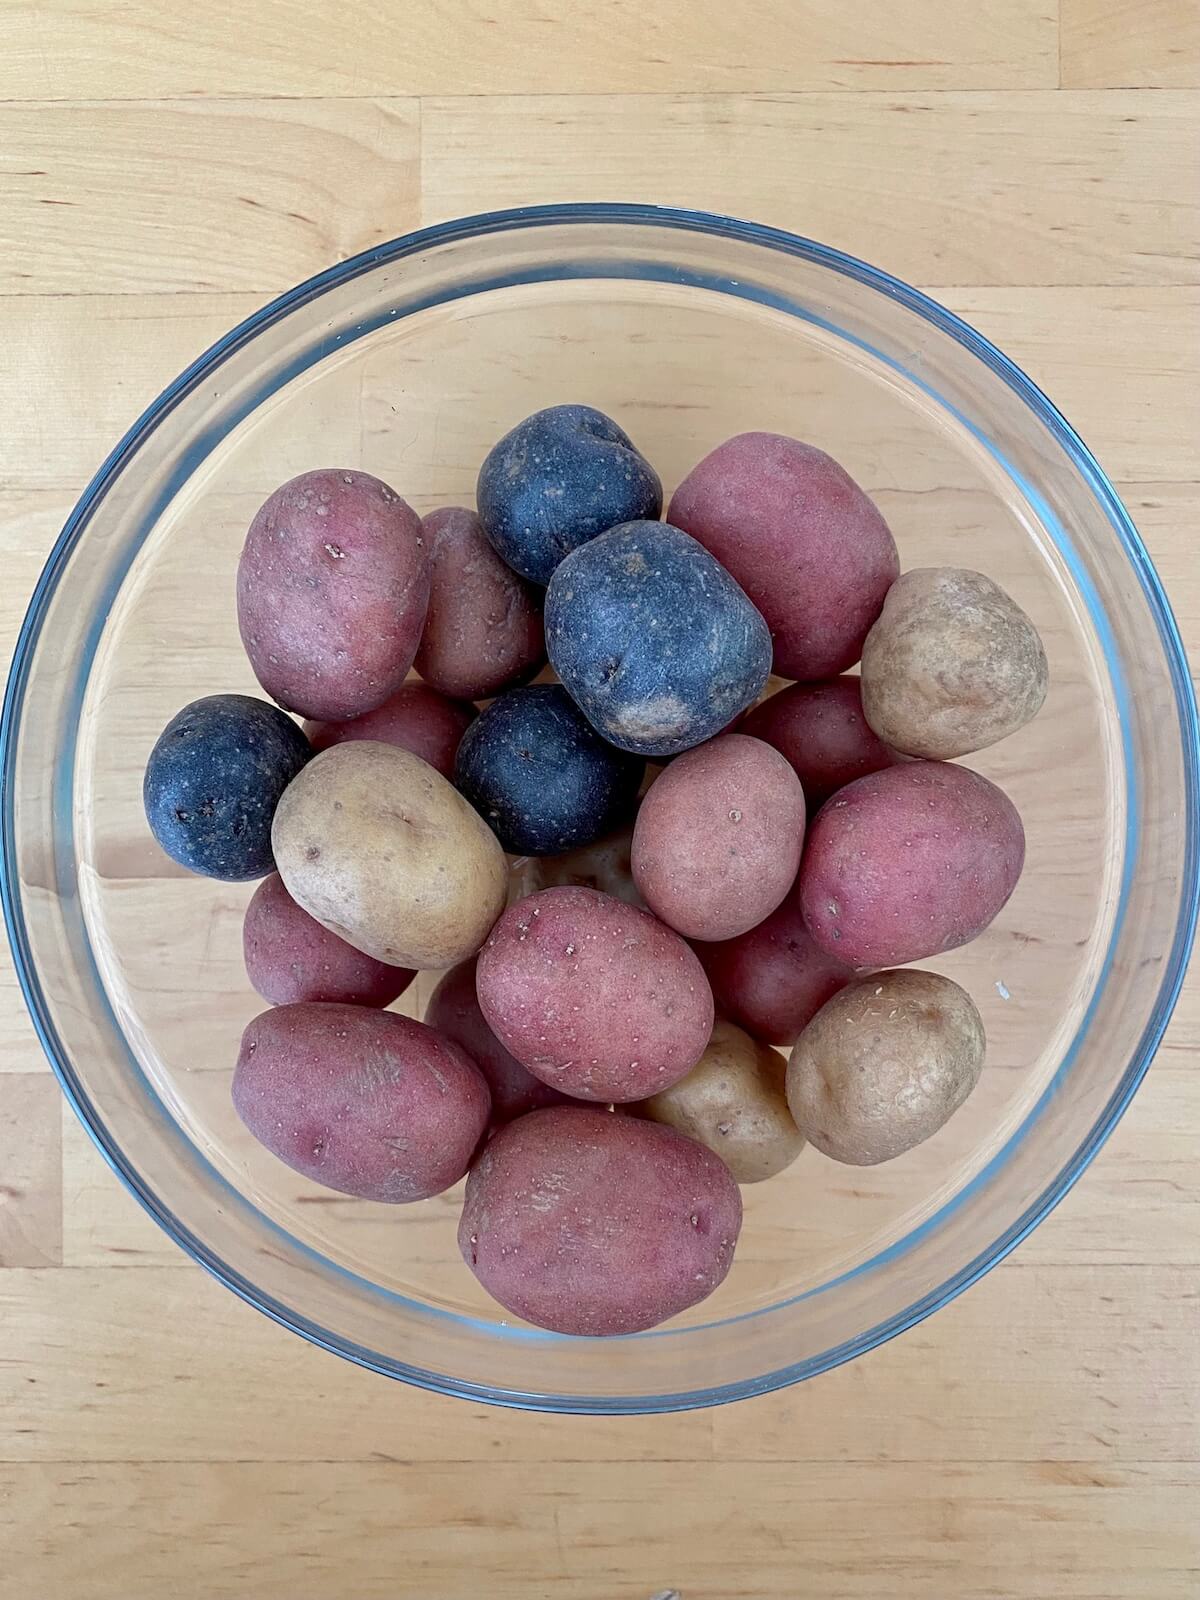 Purple, red, and white baby potatoes in a clear glass bowl.